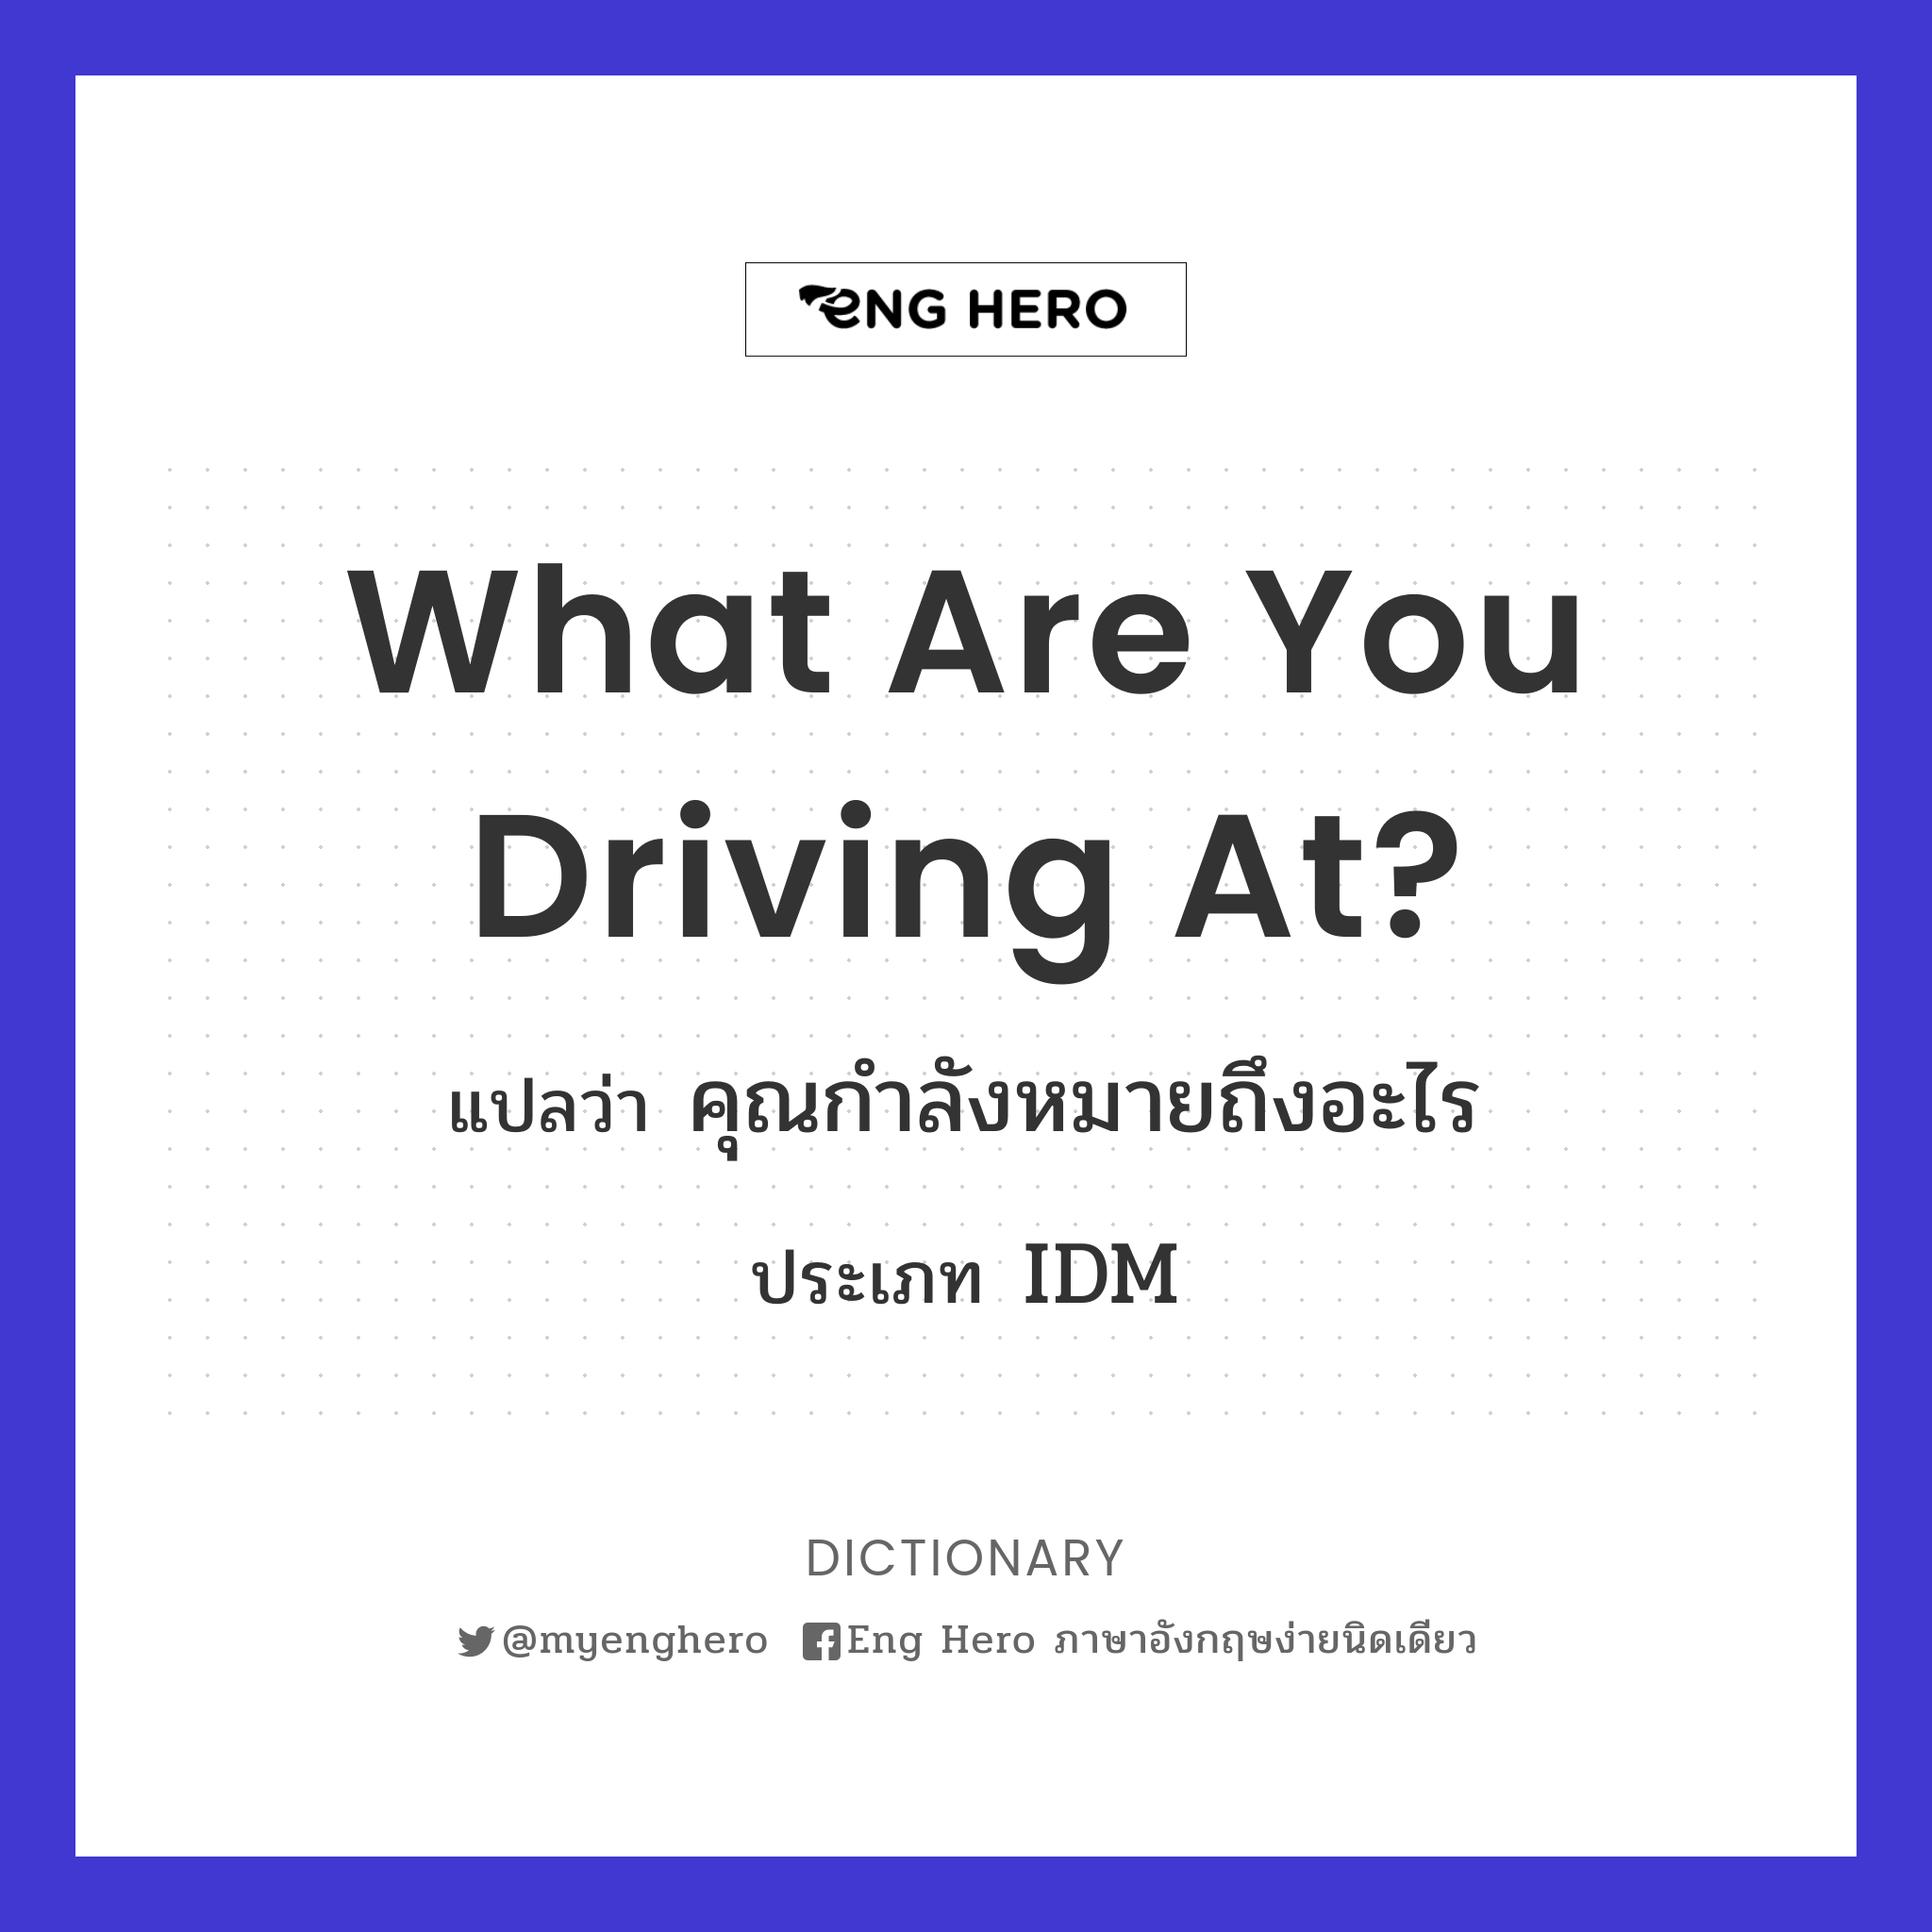 What are you driving at?